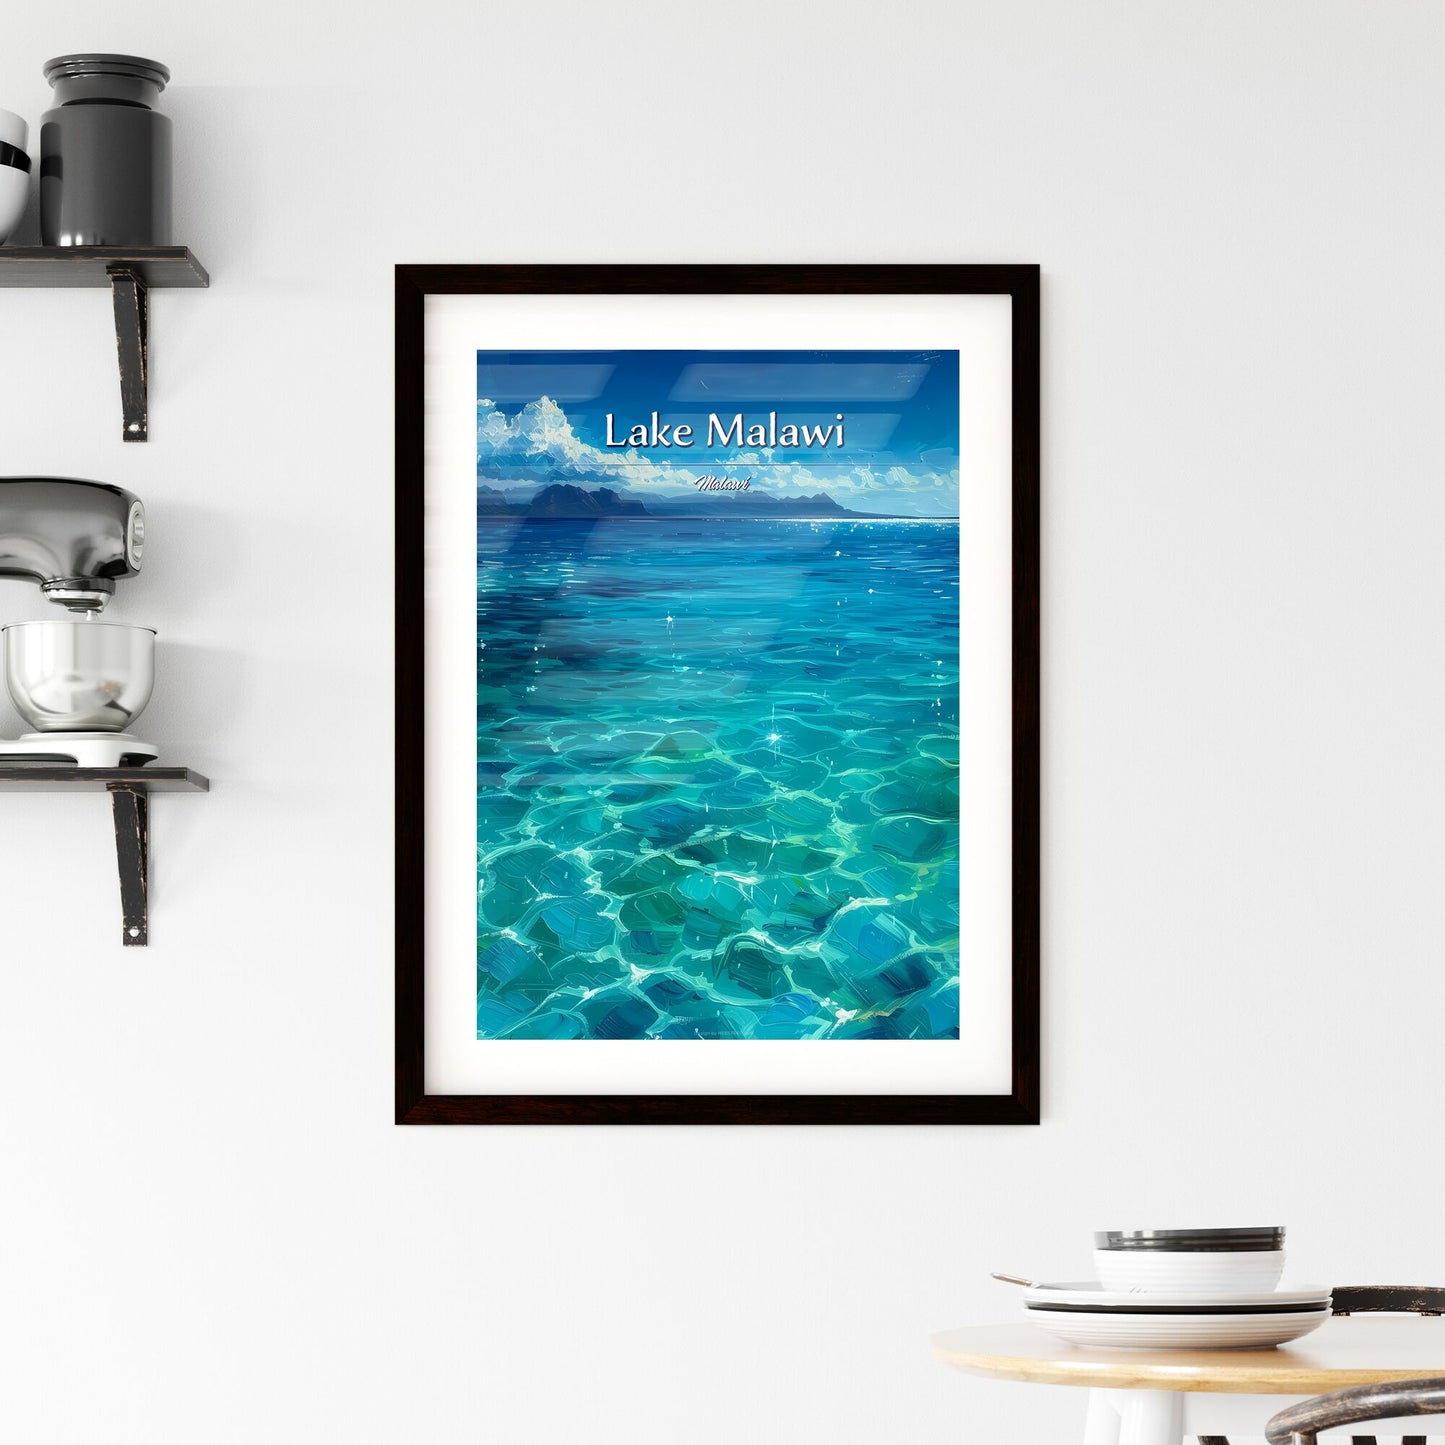 Lake Malawi, Malawi - Art print of a blue water with mountains in the background Default Title